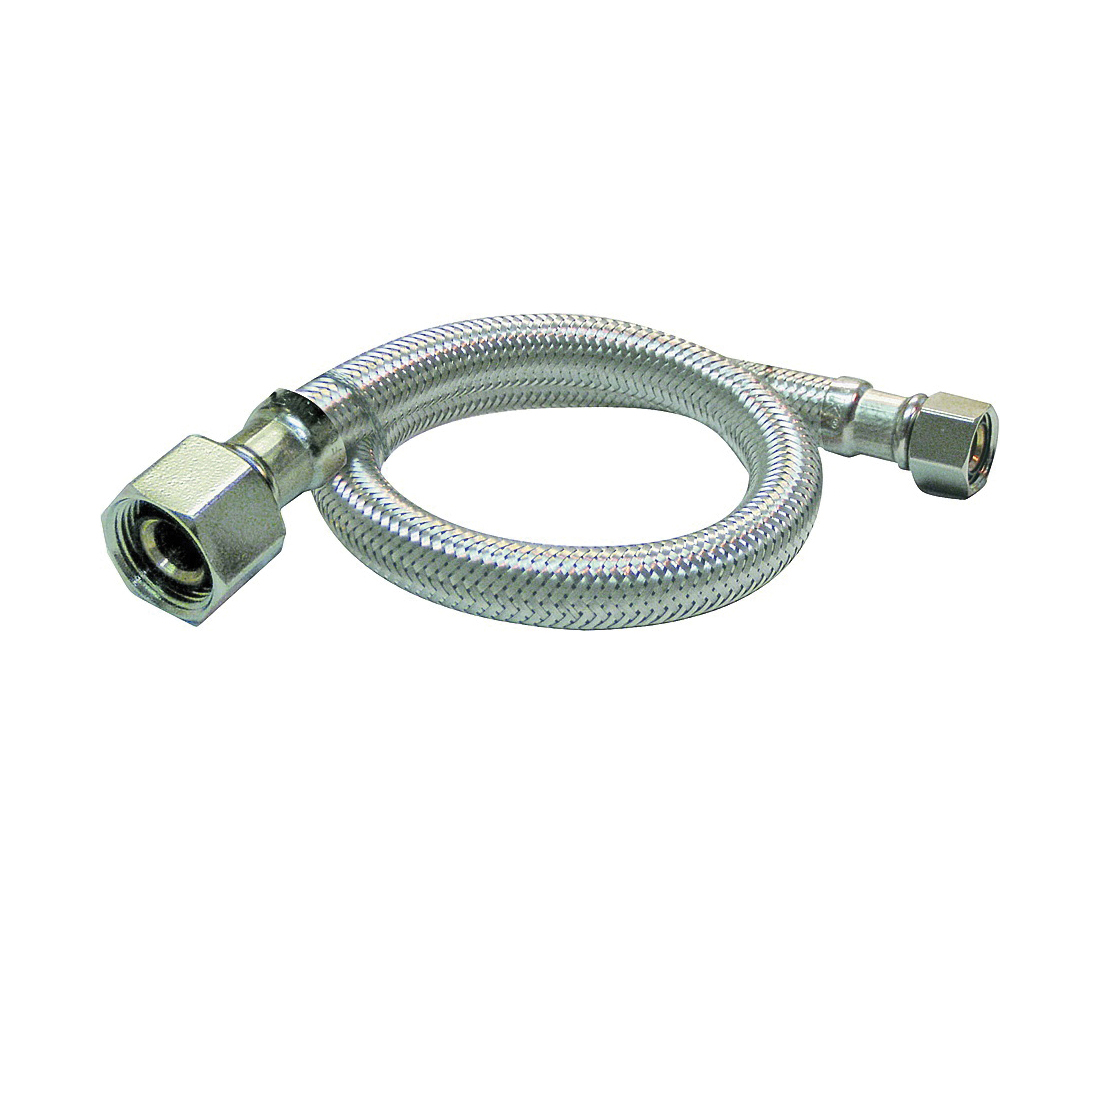 EZ Series PP23818 Sink Supply Tube, 1/2 in Inlet, FIP Inlet, 1/2 in Outlet, FIP Outlet, Stainless Steel Tubing, 20 in L